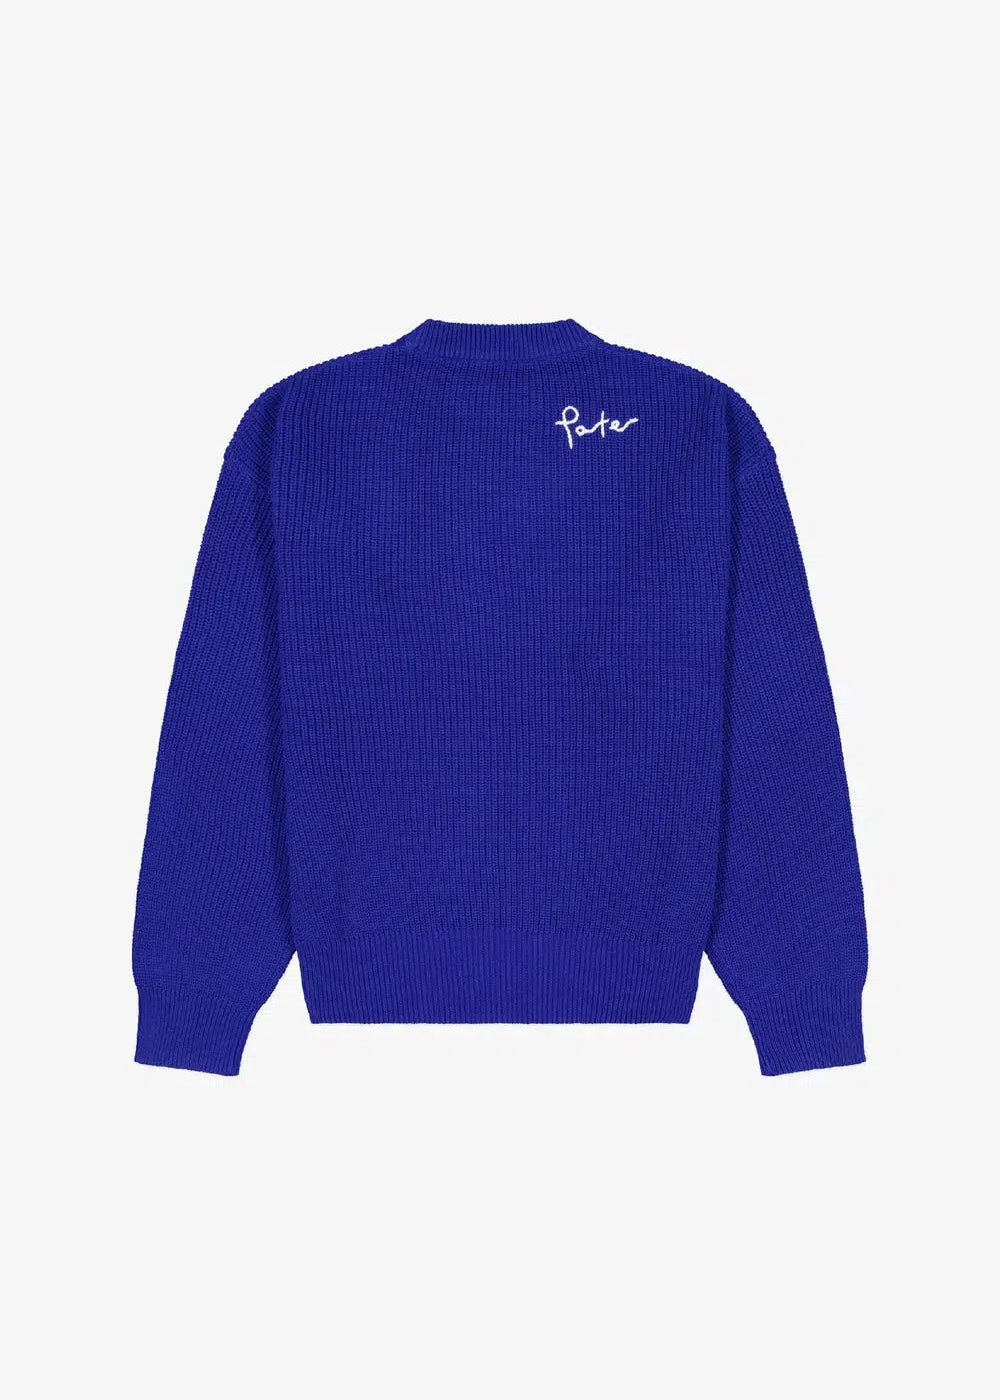 ORGANIC RIBBED KNIT MID-BLUE + WHITE HAND-STITCH | PORTER JAMES SPORTS | Mad About The Boy